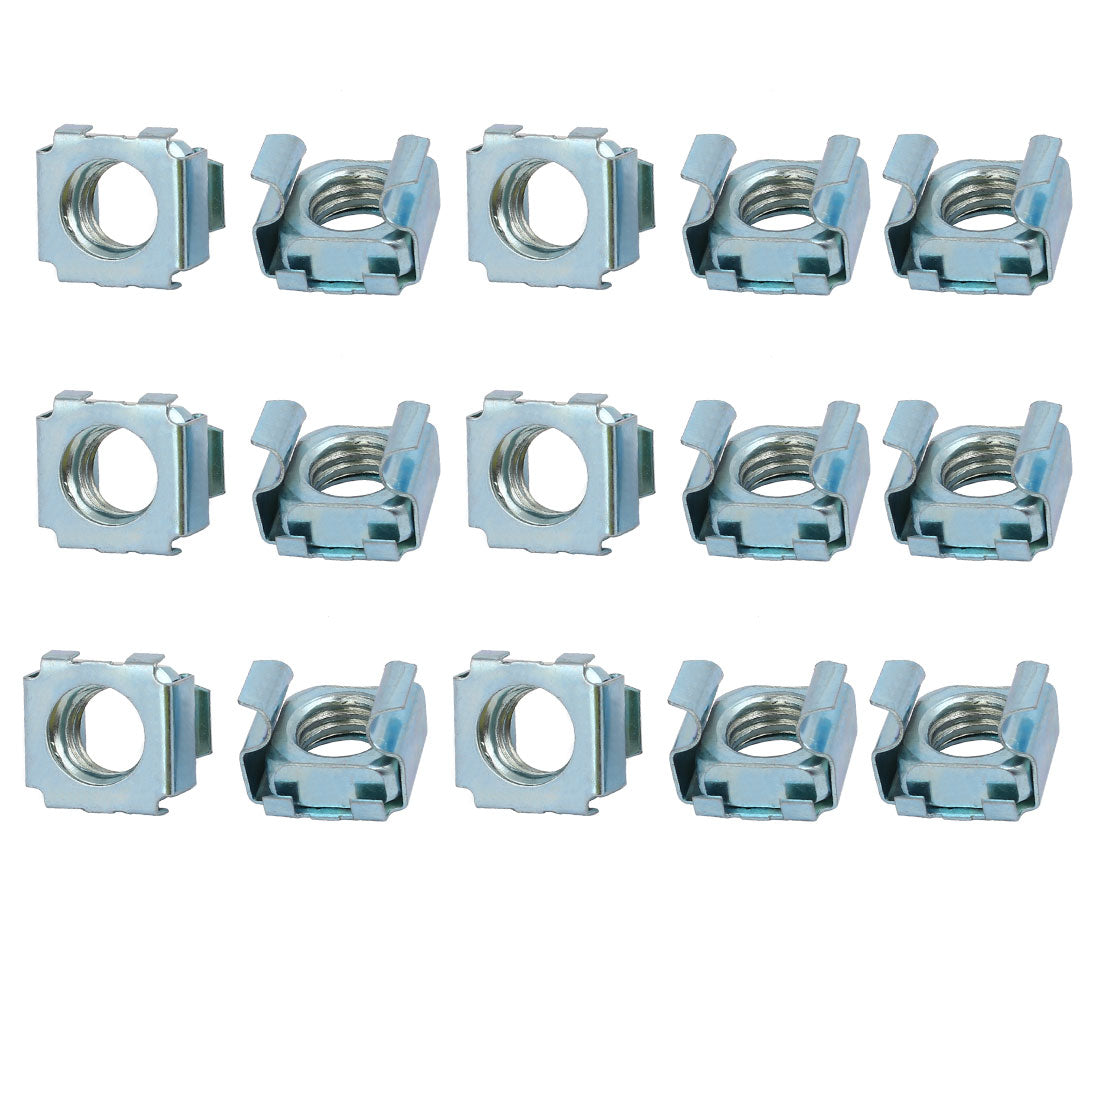 uxcell Uxcell 15pcs M10 Carbon Steel Captive Cage Nut Silver Tone for Server Shelf Cabinet